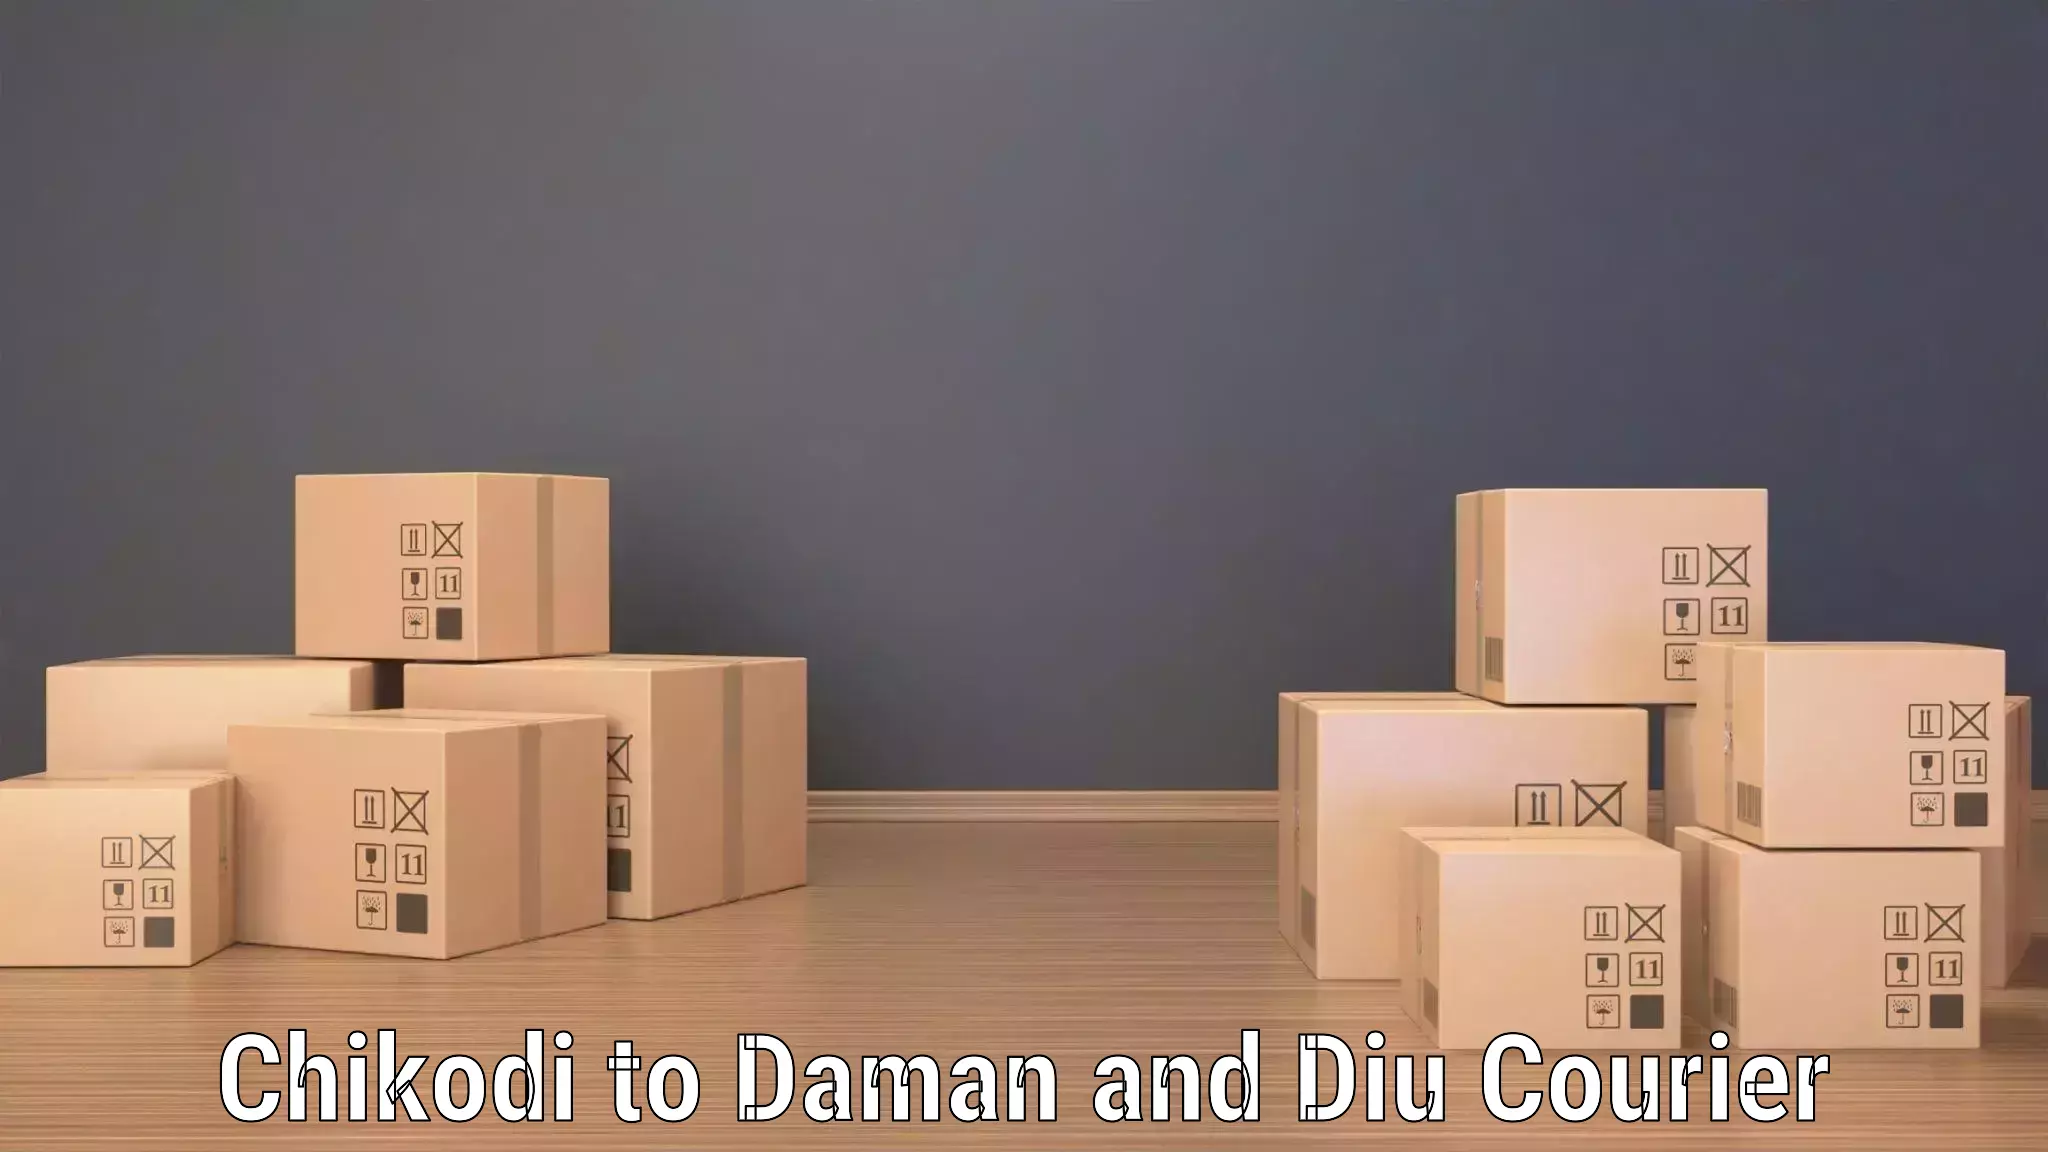 Same-day delivery options Chikodi to Daman and Diu